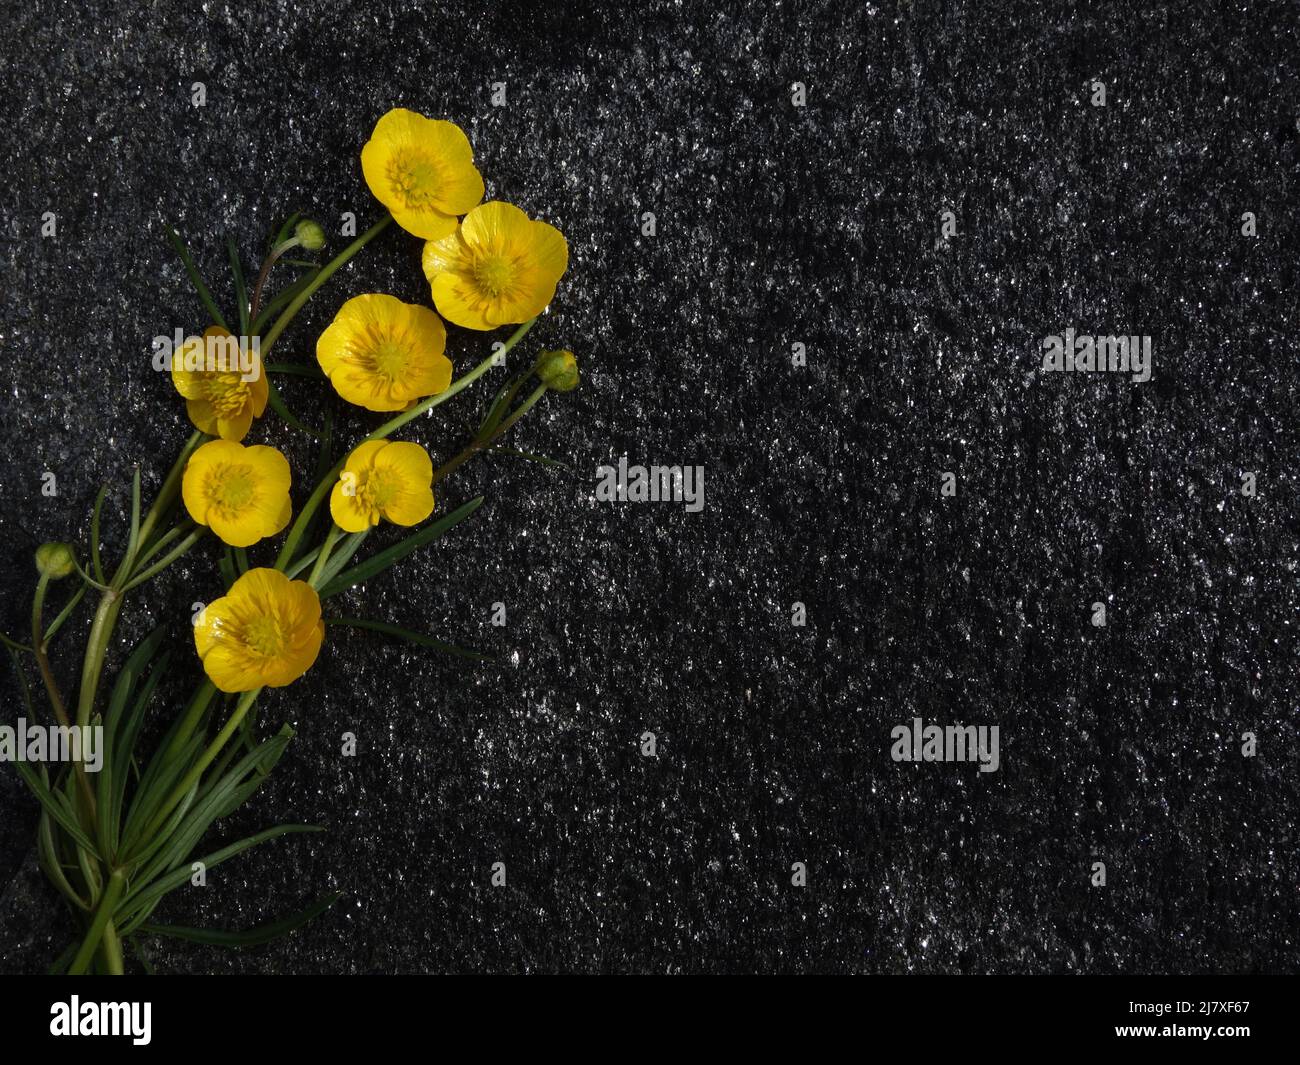 Buttercup with its long stems, neatly laid out on a black stone plate. Stock Photo